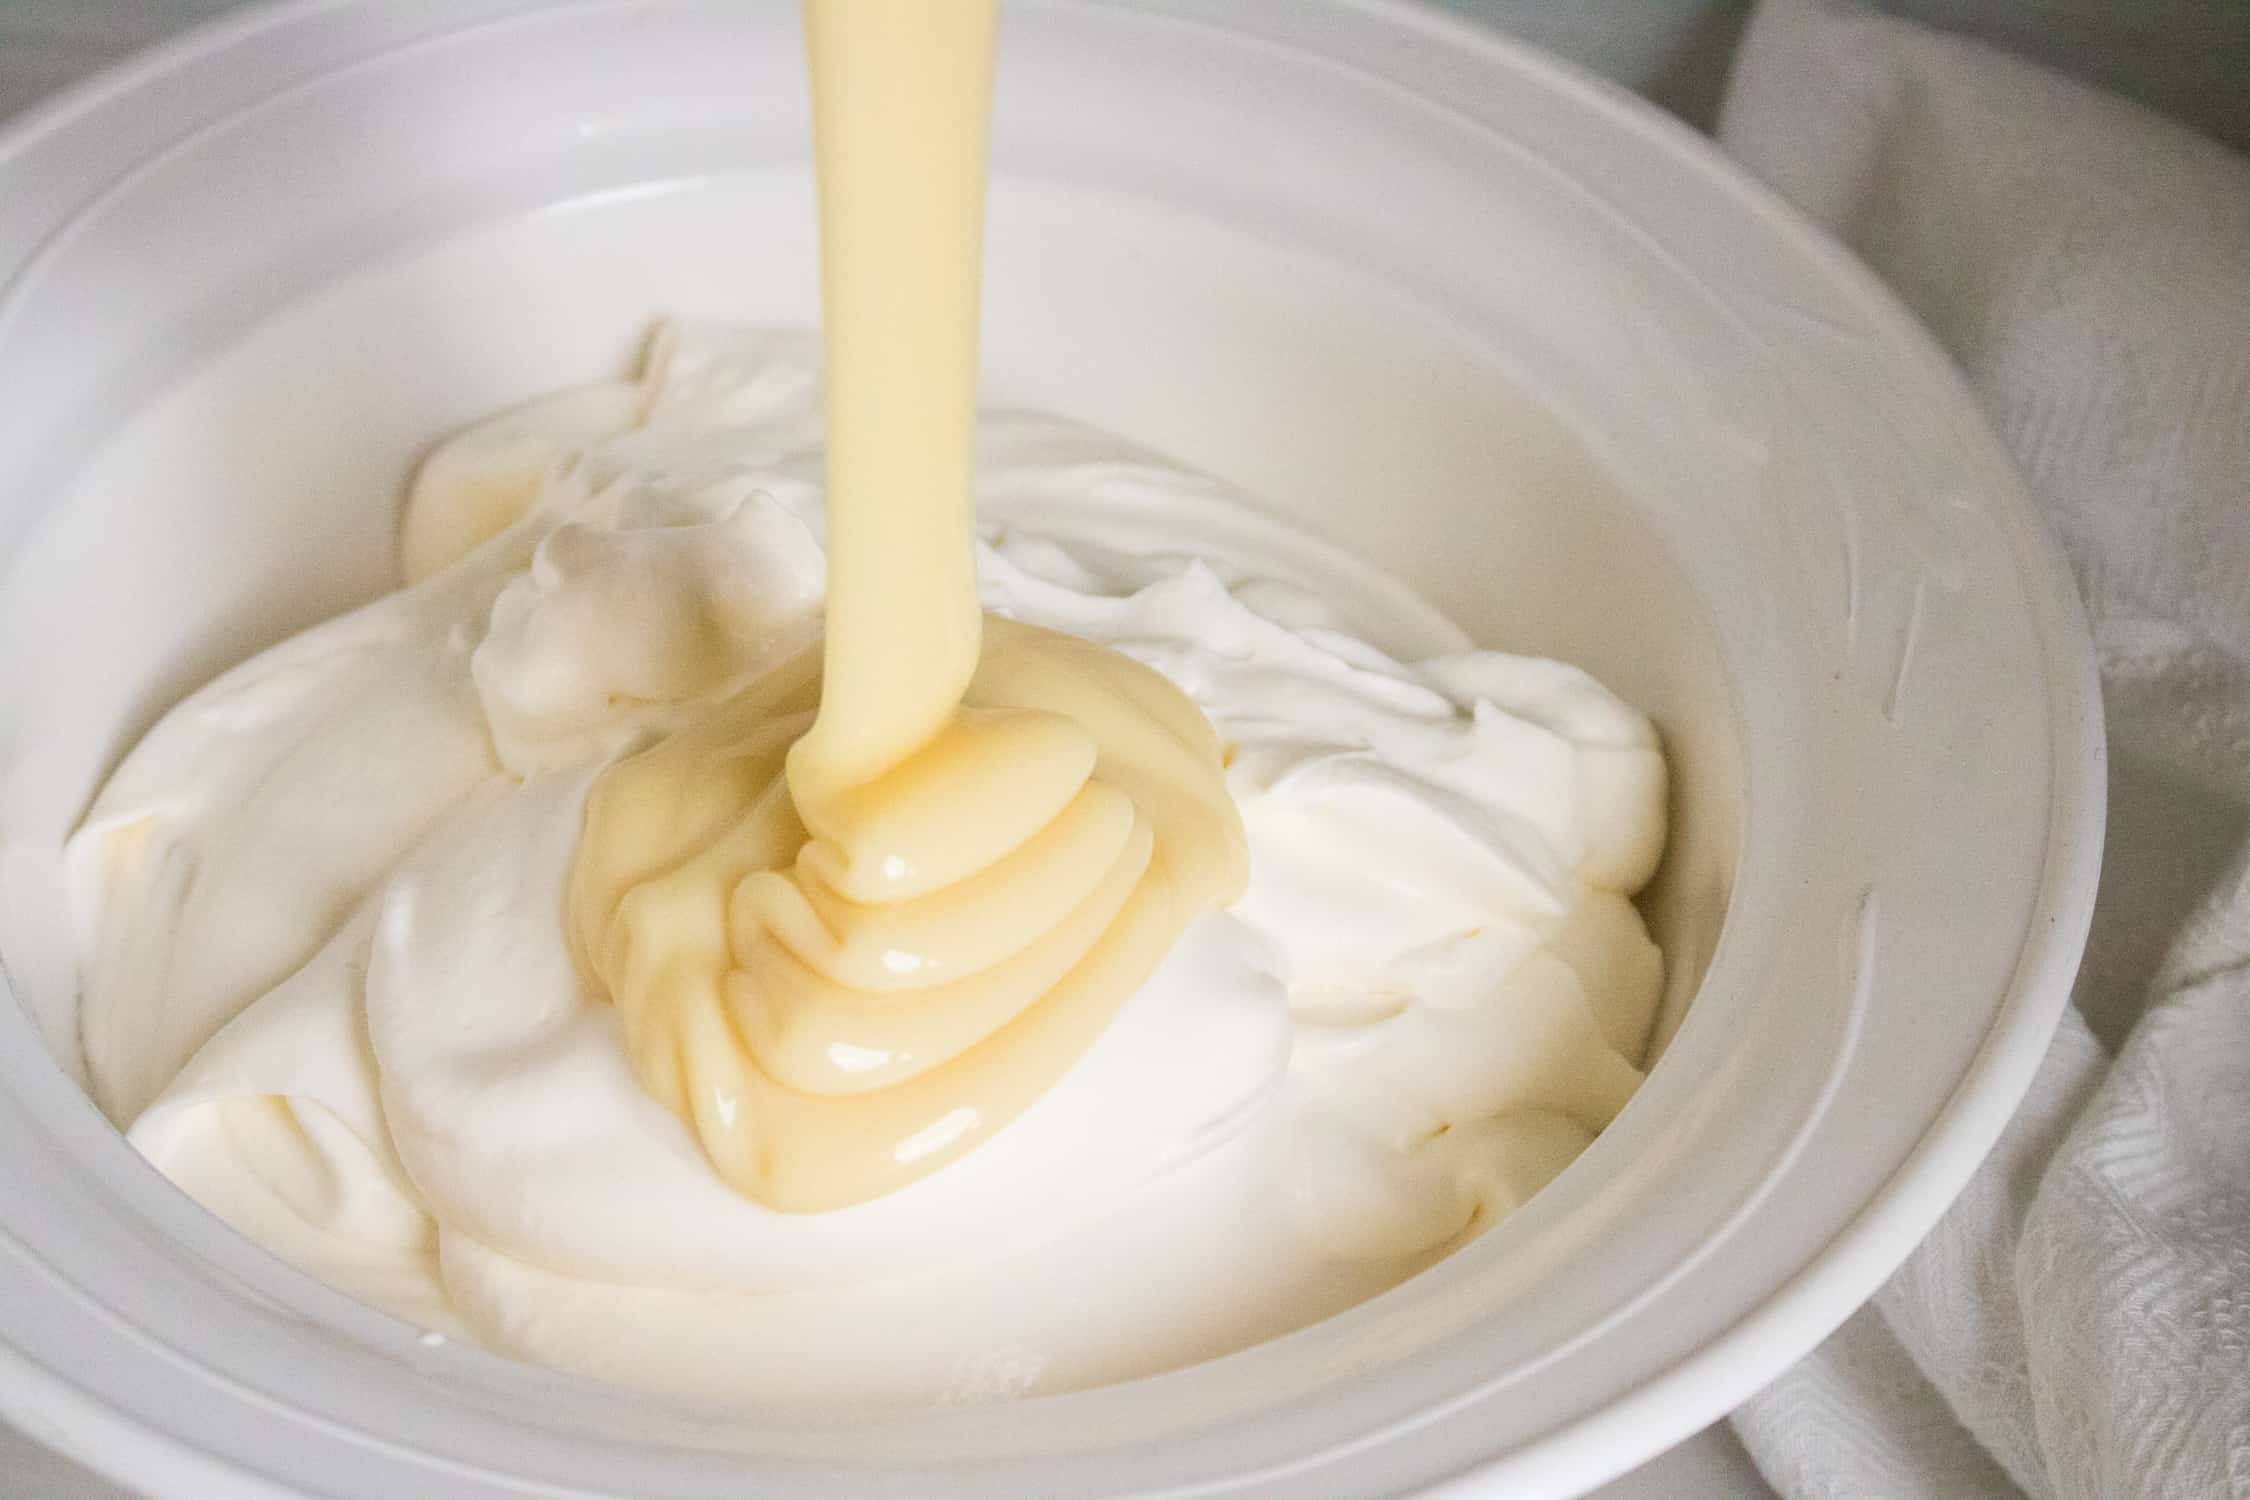 sweetened condensed milk being poured into a white mixing bowl filled with whipped heavy cream